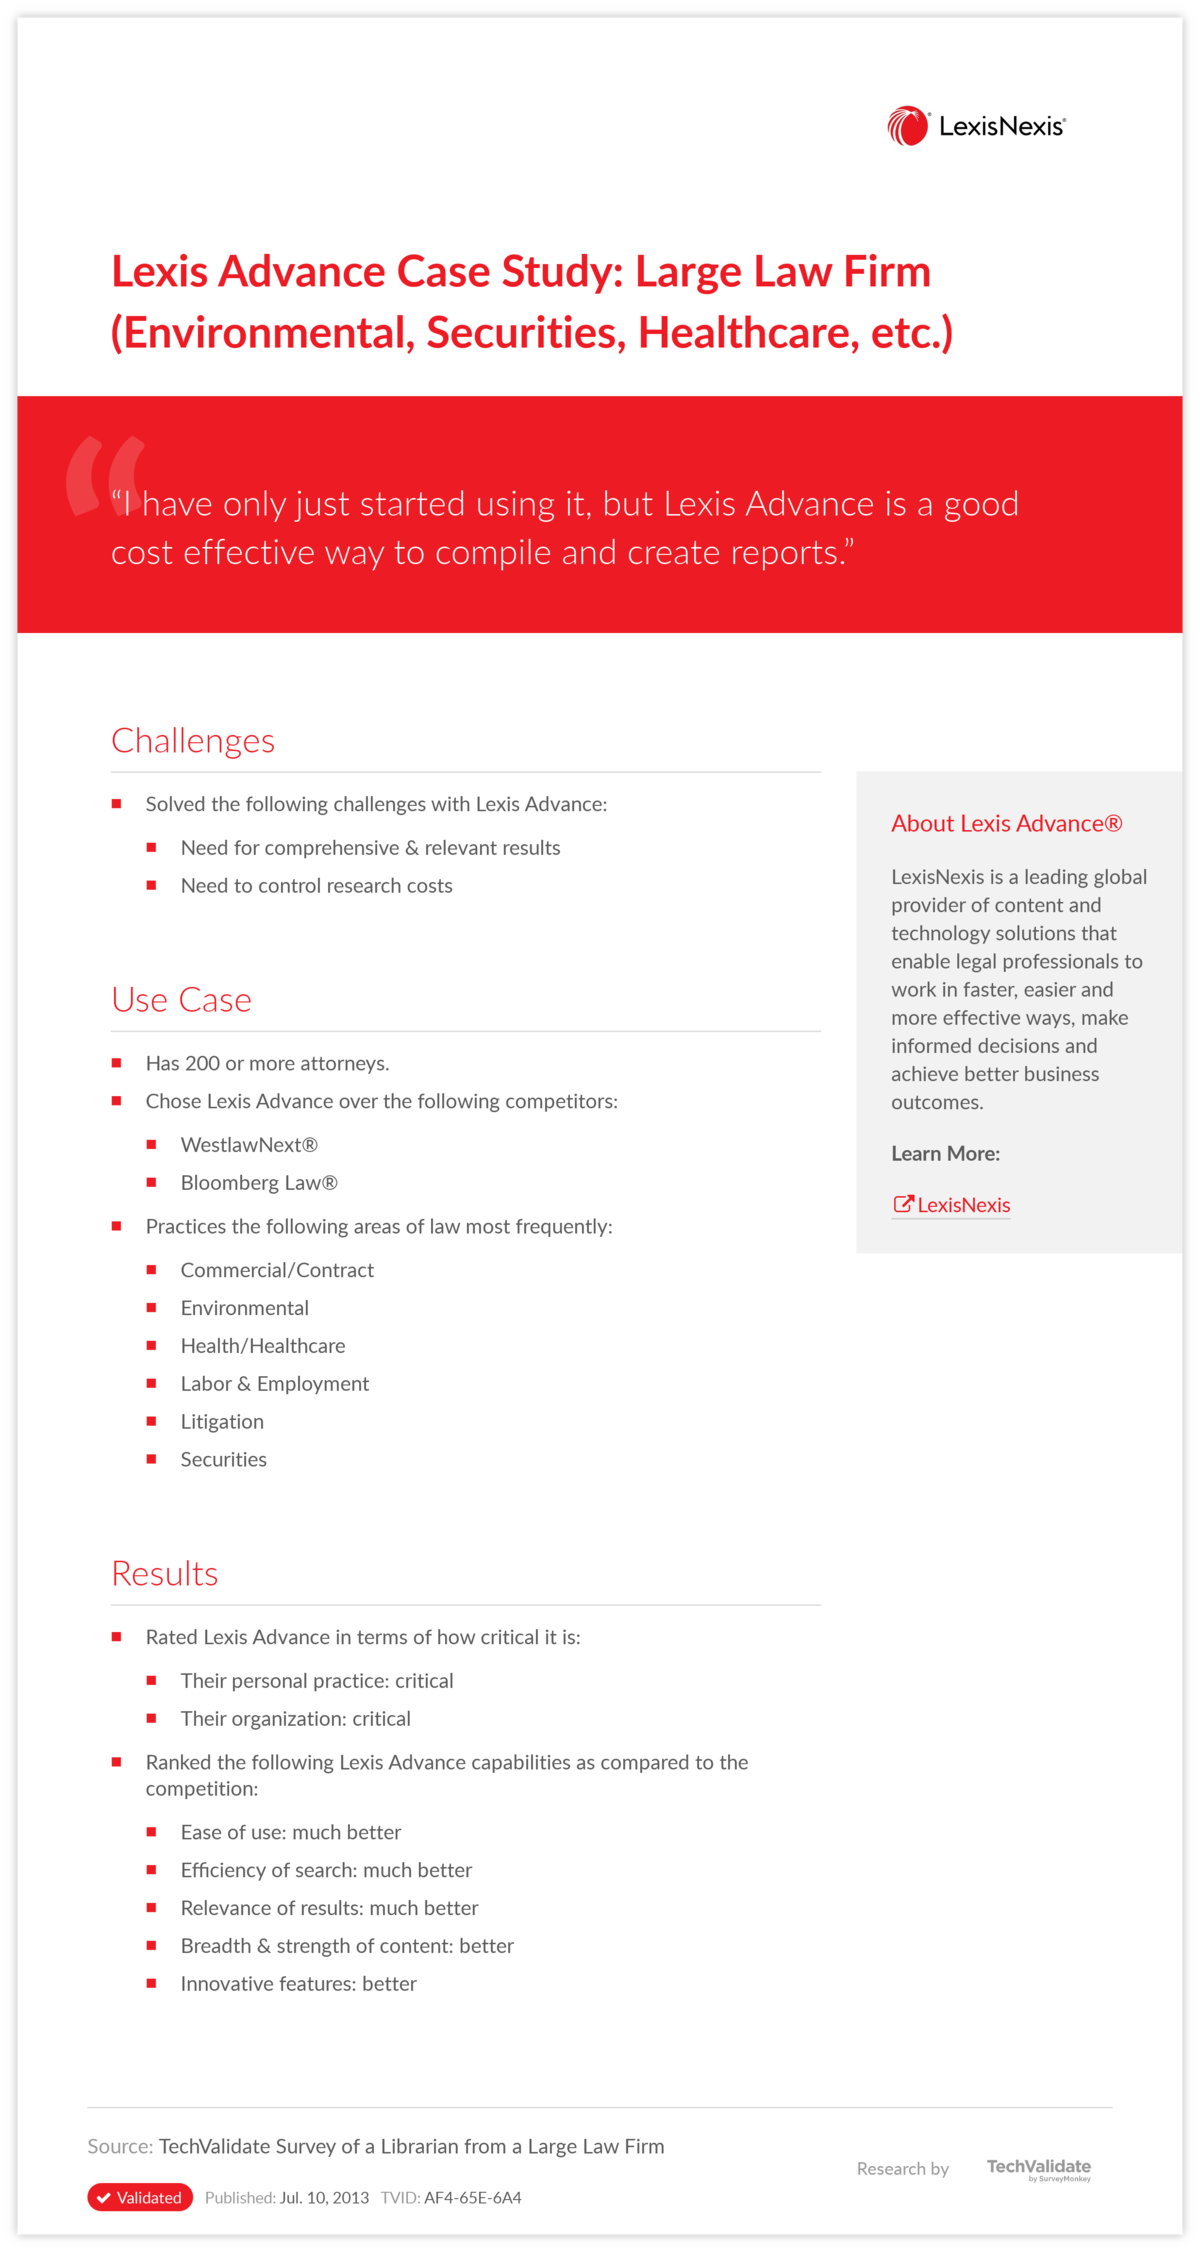 Lexis Advance Case Study: Large Law Firm (Environmental, Securities, Healthcare, etc.)